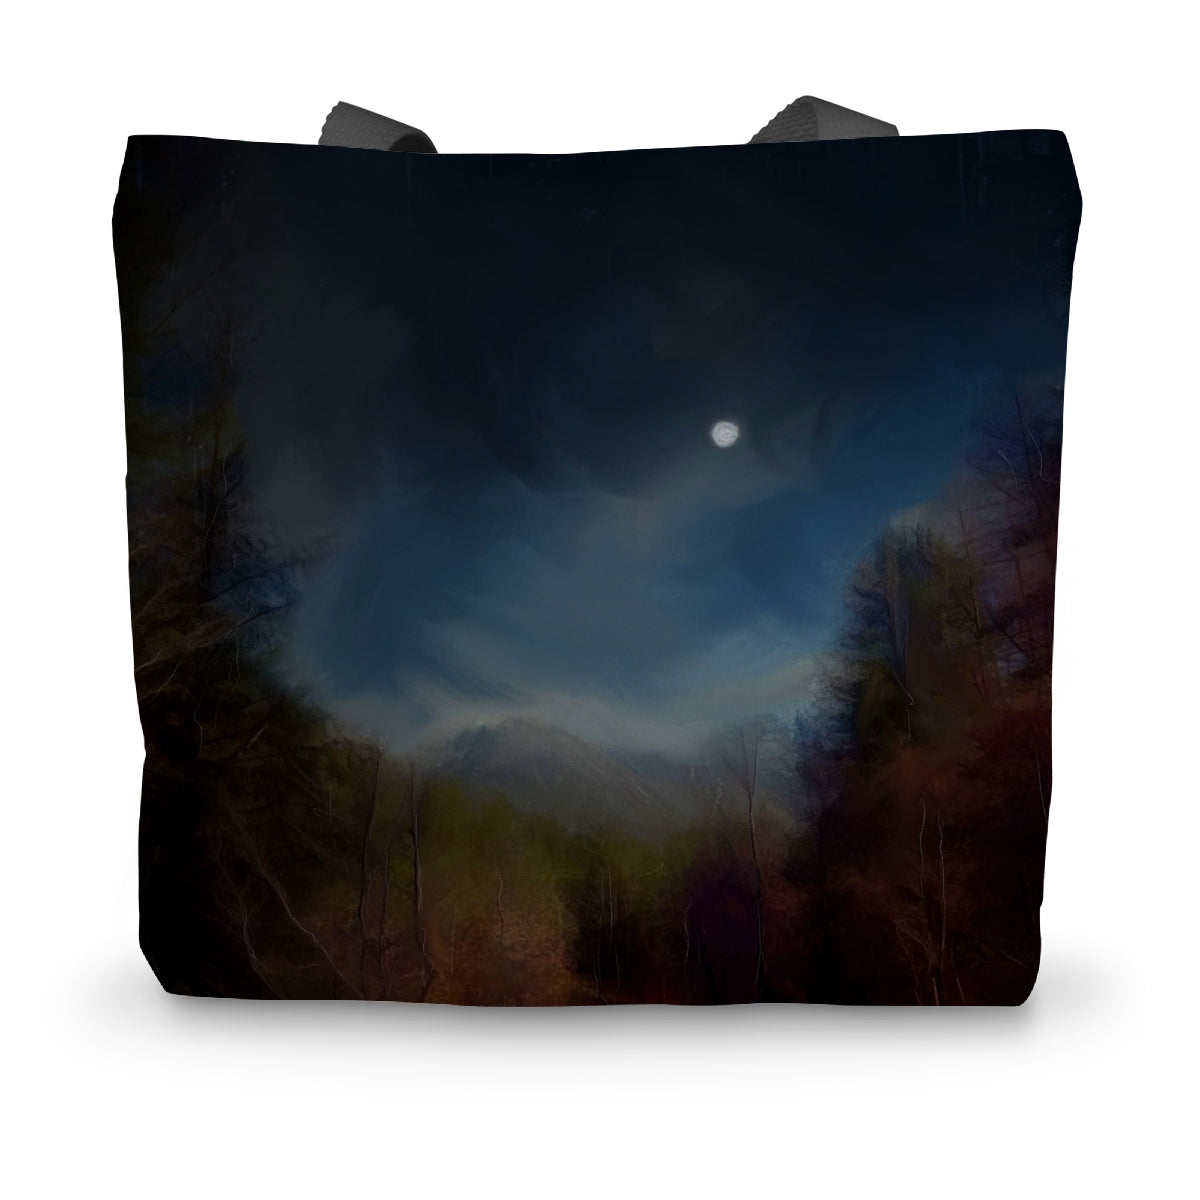 Glencoe Lochan Moonlight Art Gifts Canvas Tote Bag-Bags-Scottish Lochs & Mountains Art Gallery-14"x18.5"-Paintings, Prints, Homeware, Art Gifts From Scotland By Scottish Artist Kevin Hunter